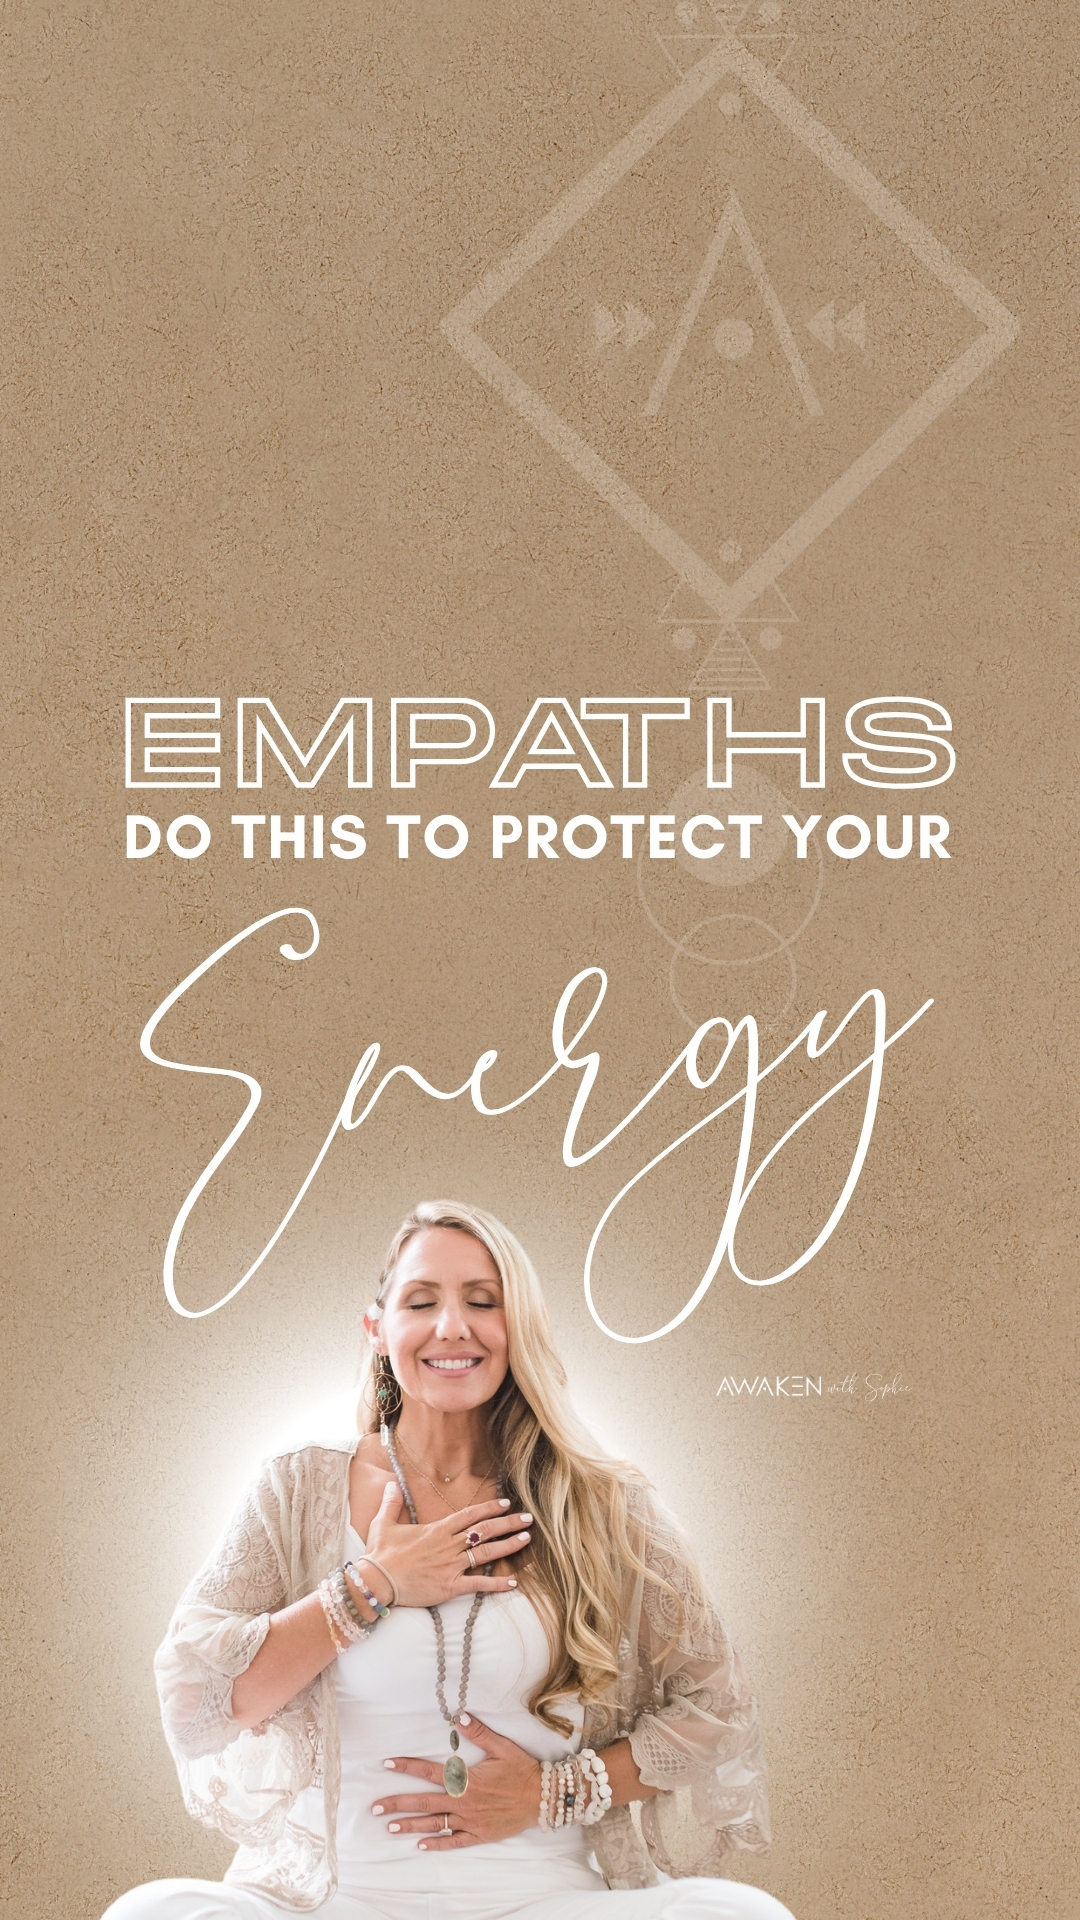 Empaths: Do This to Protect Your Energy article by Sophie Frabotta